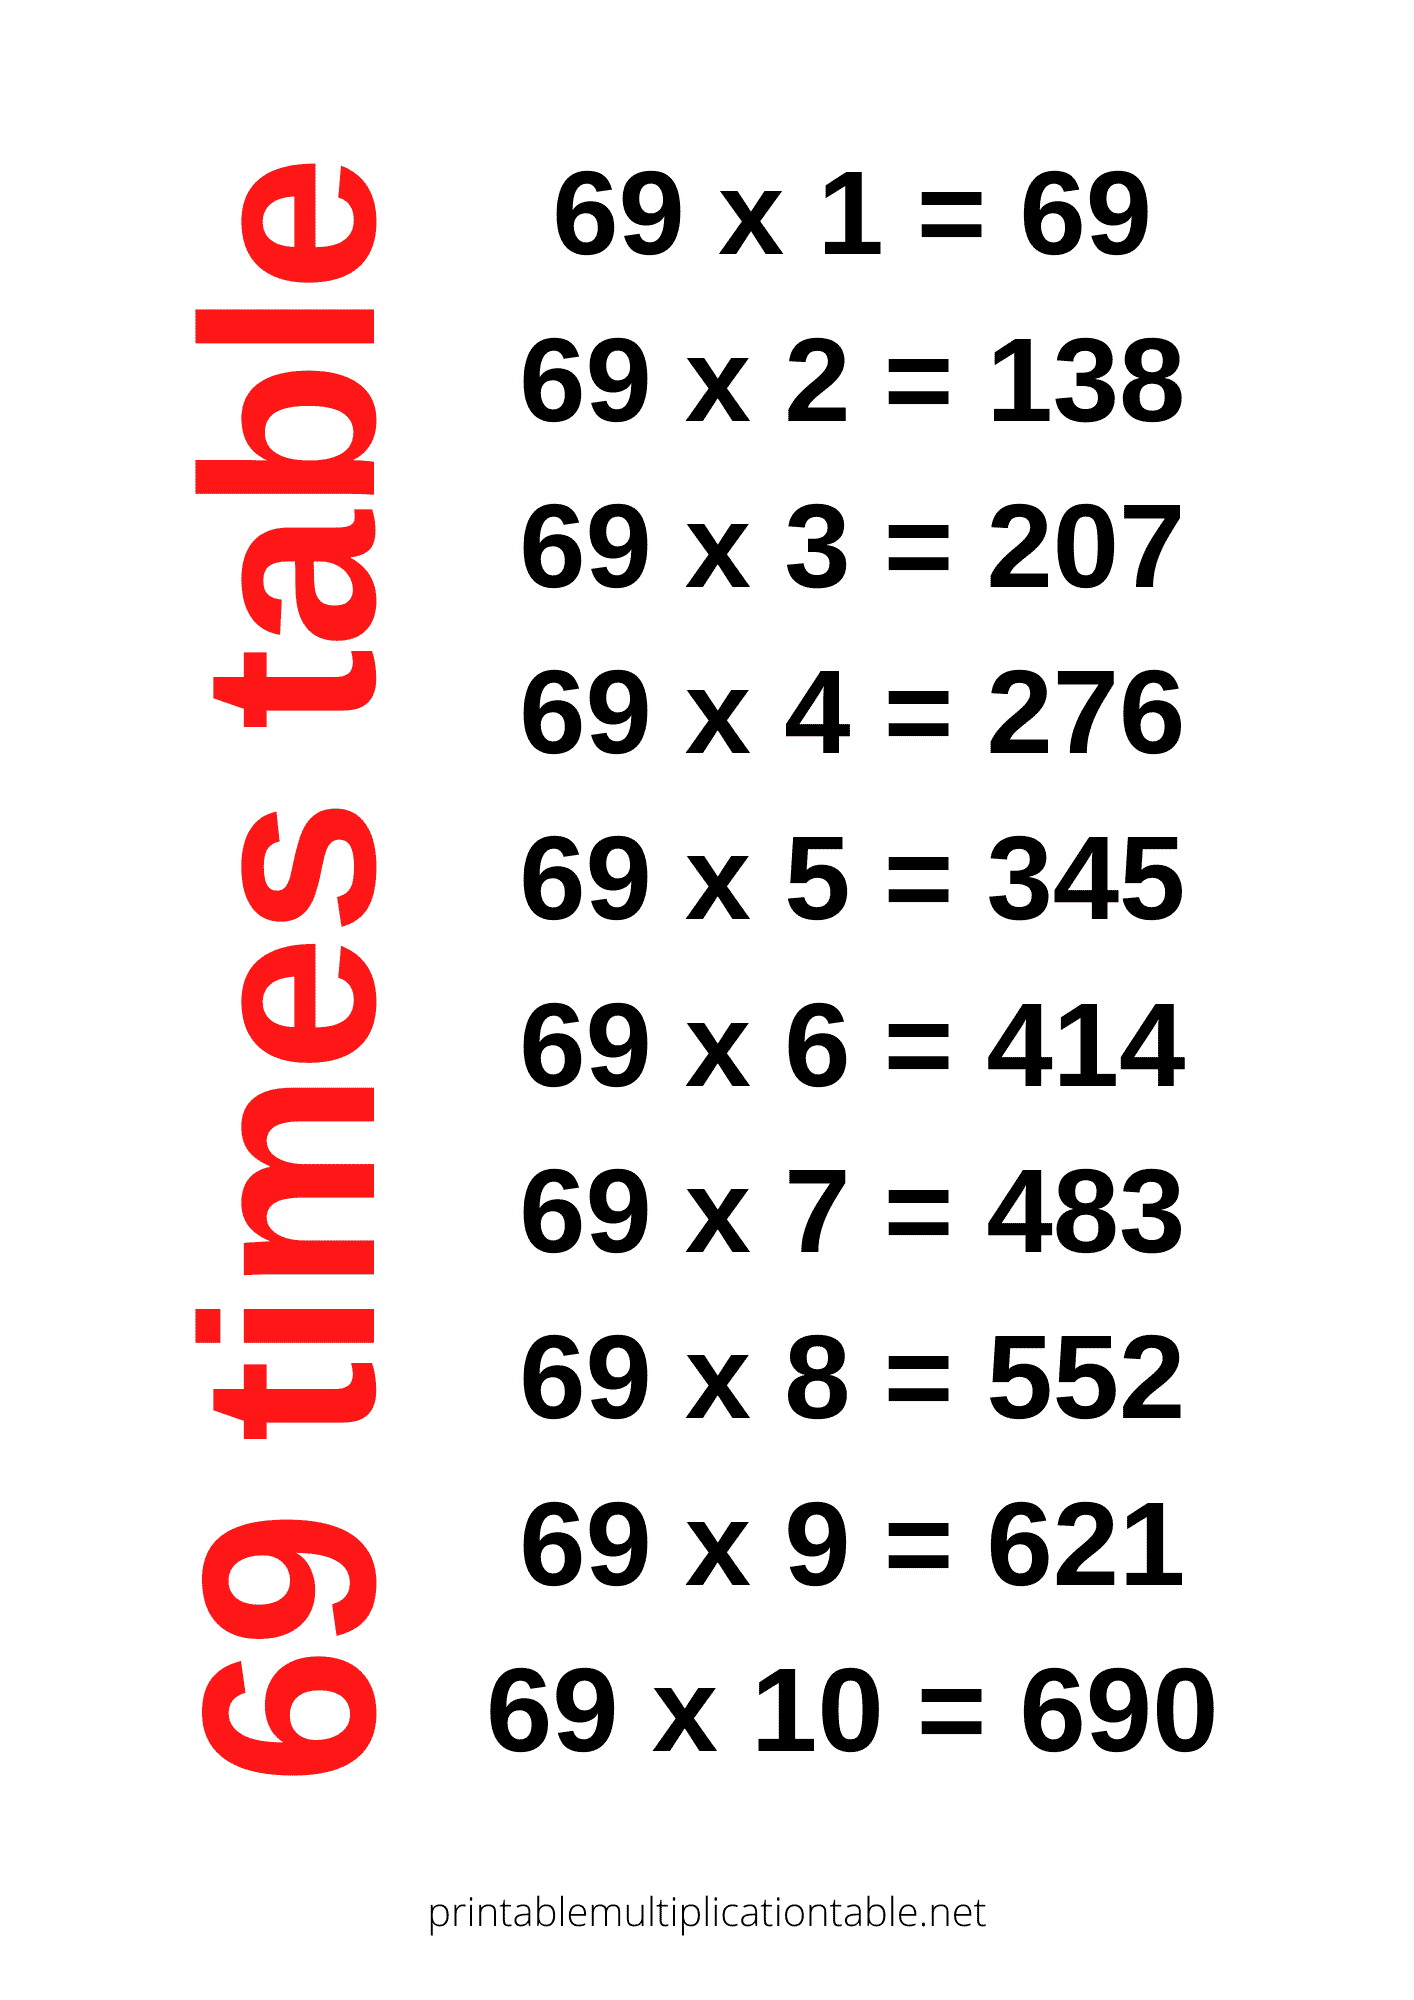 69 times table chart